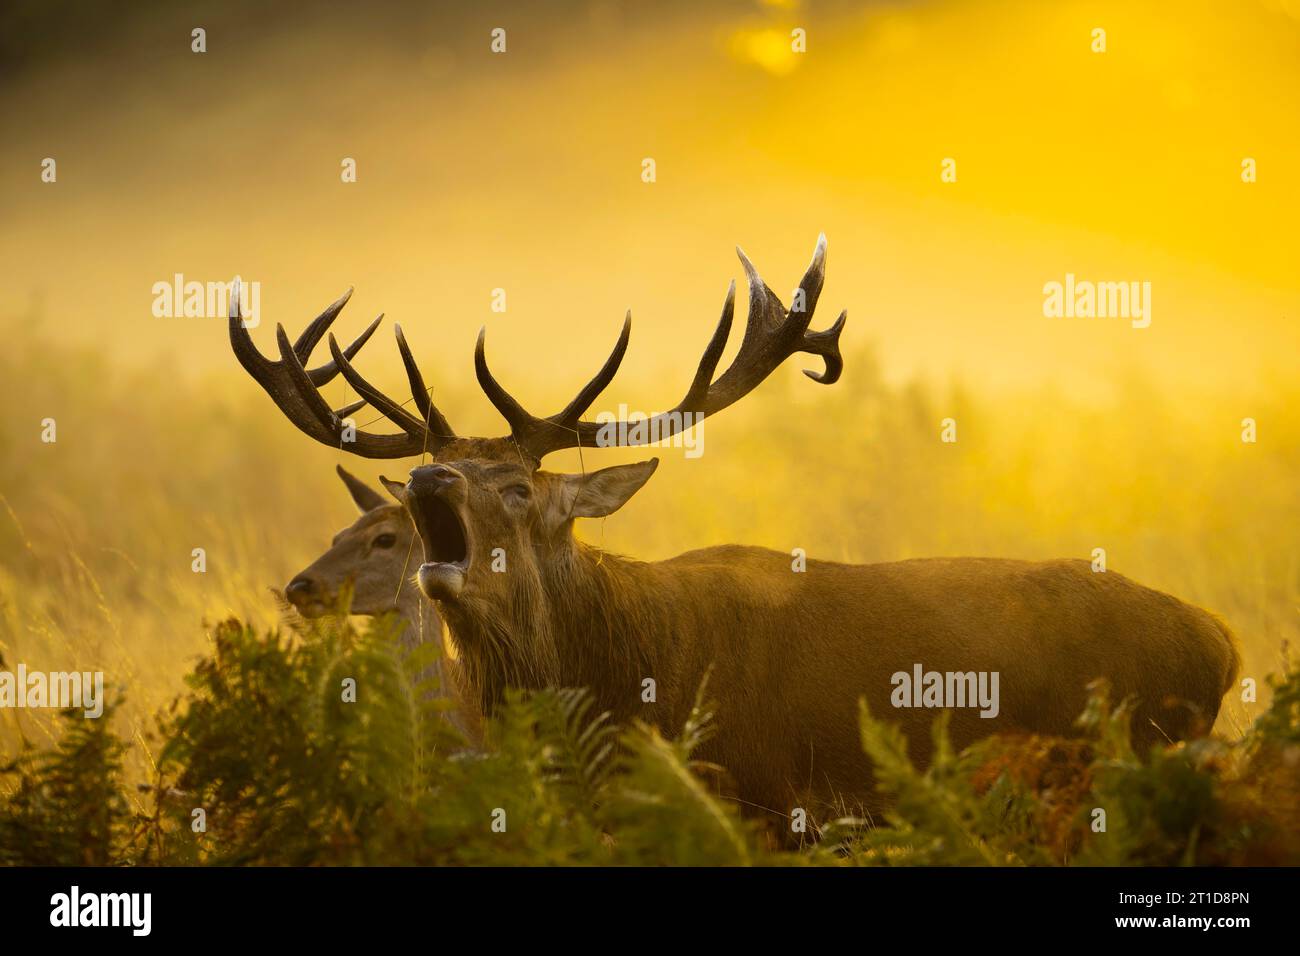 Golden hour rutting has began for the deers LONDON, ENGLAND STRIKING IMAGES of a stag bellowing in the golden hour light on October 8th have been capt Stock Photo